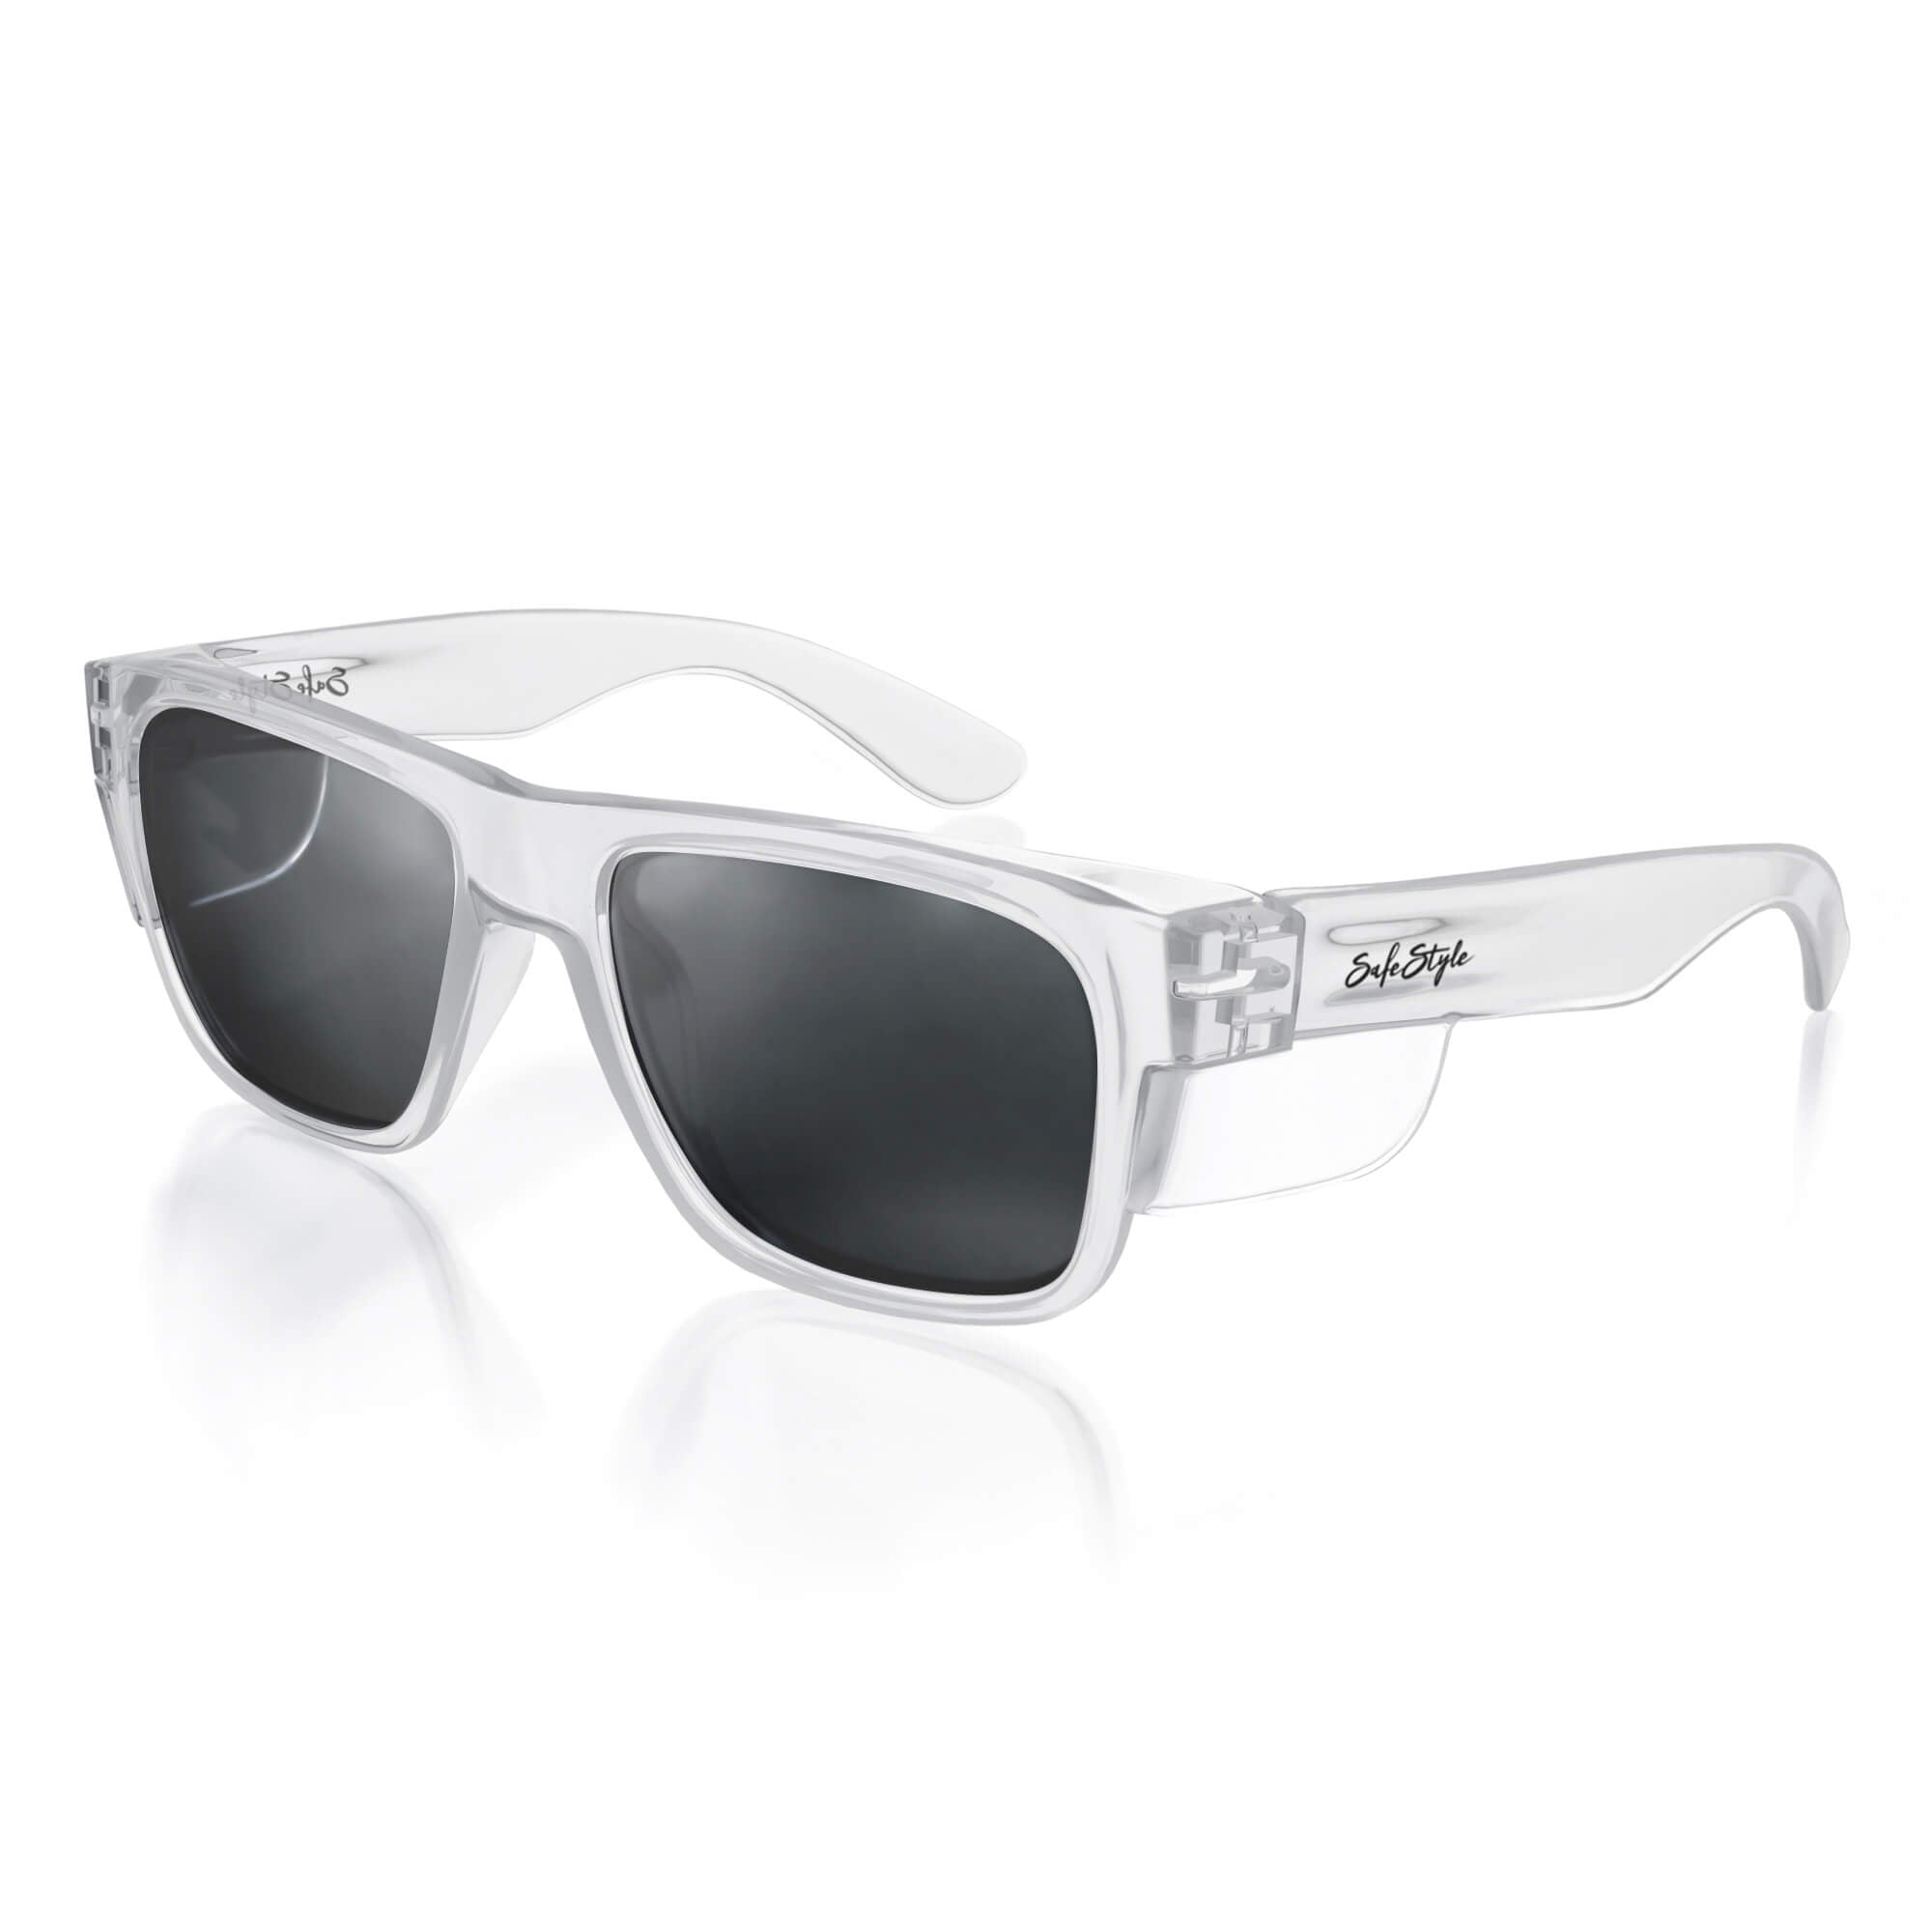 SafeStyle Fusions Clear Frame/Polarised Lens glasses